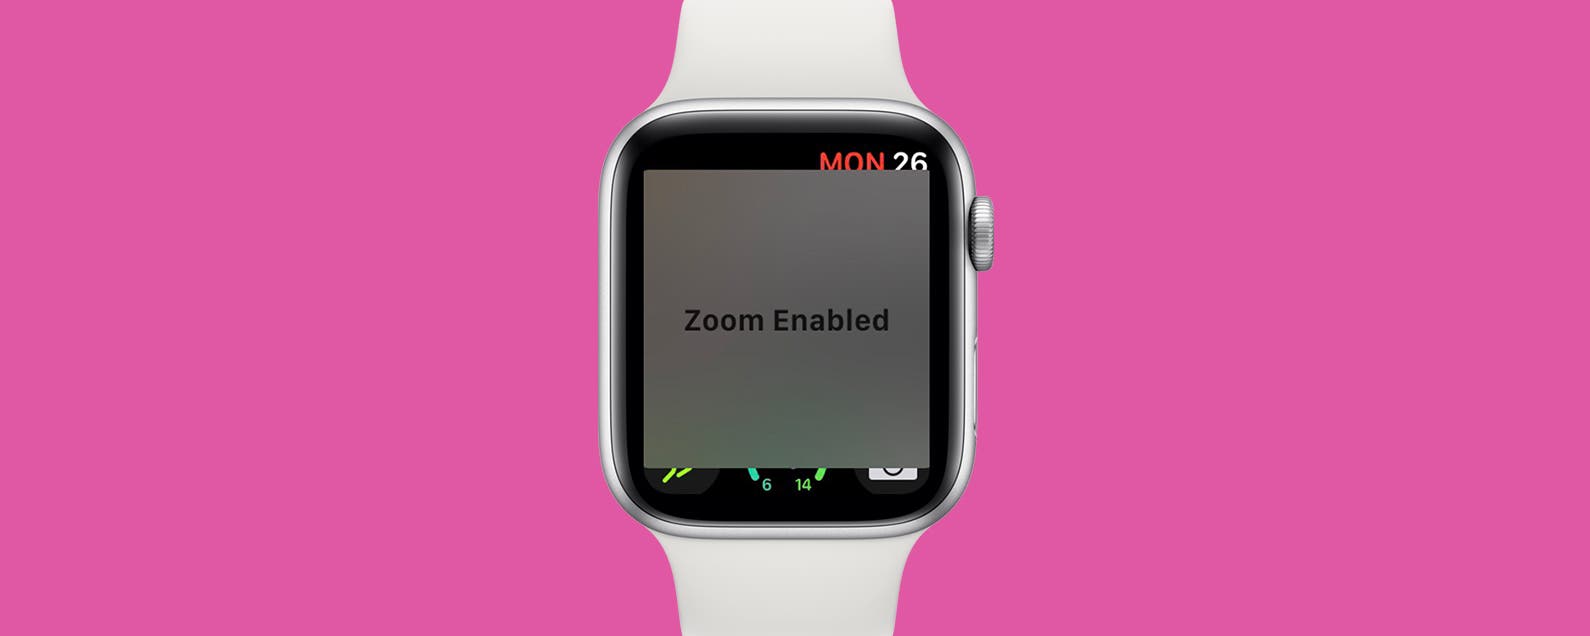 Apple Watch Screen Zoomed In & How to Fix (2 Ways) - YouTube